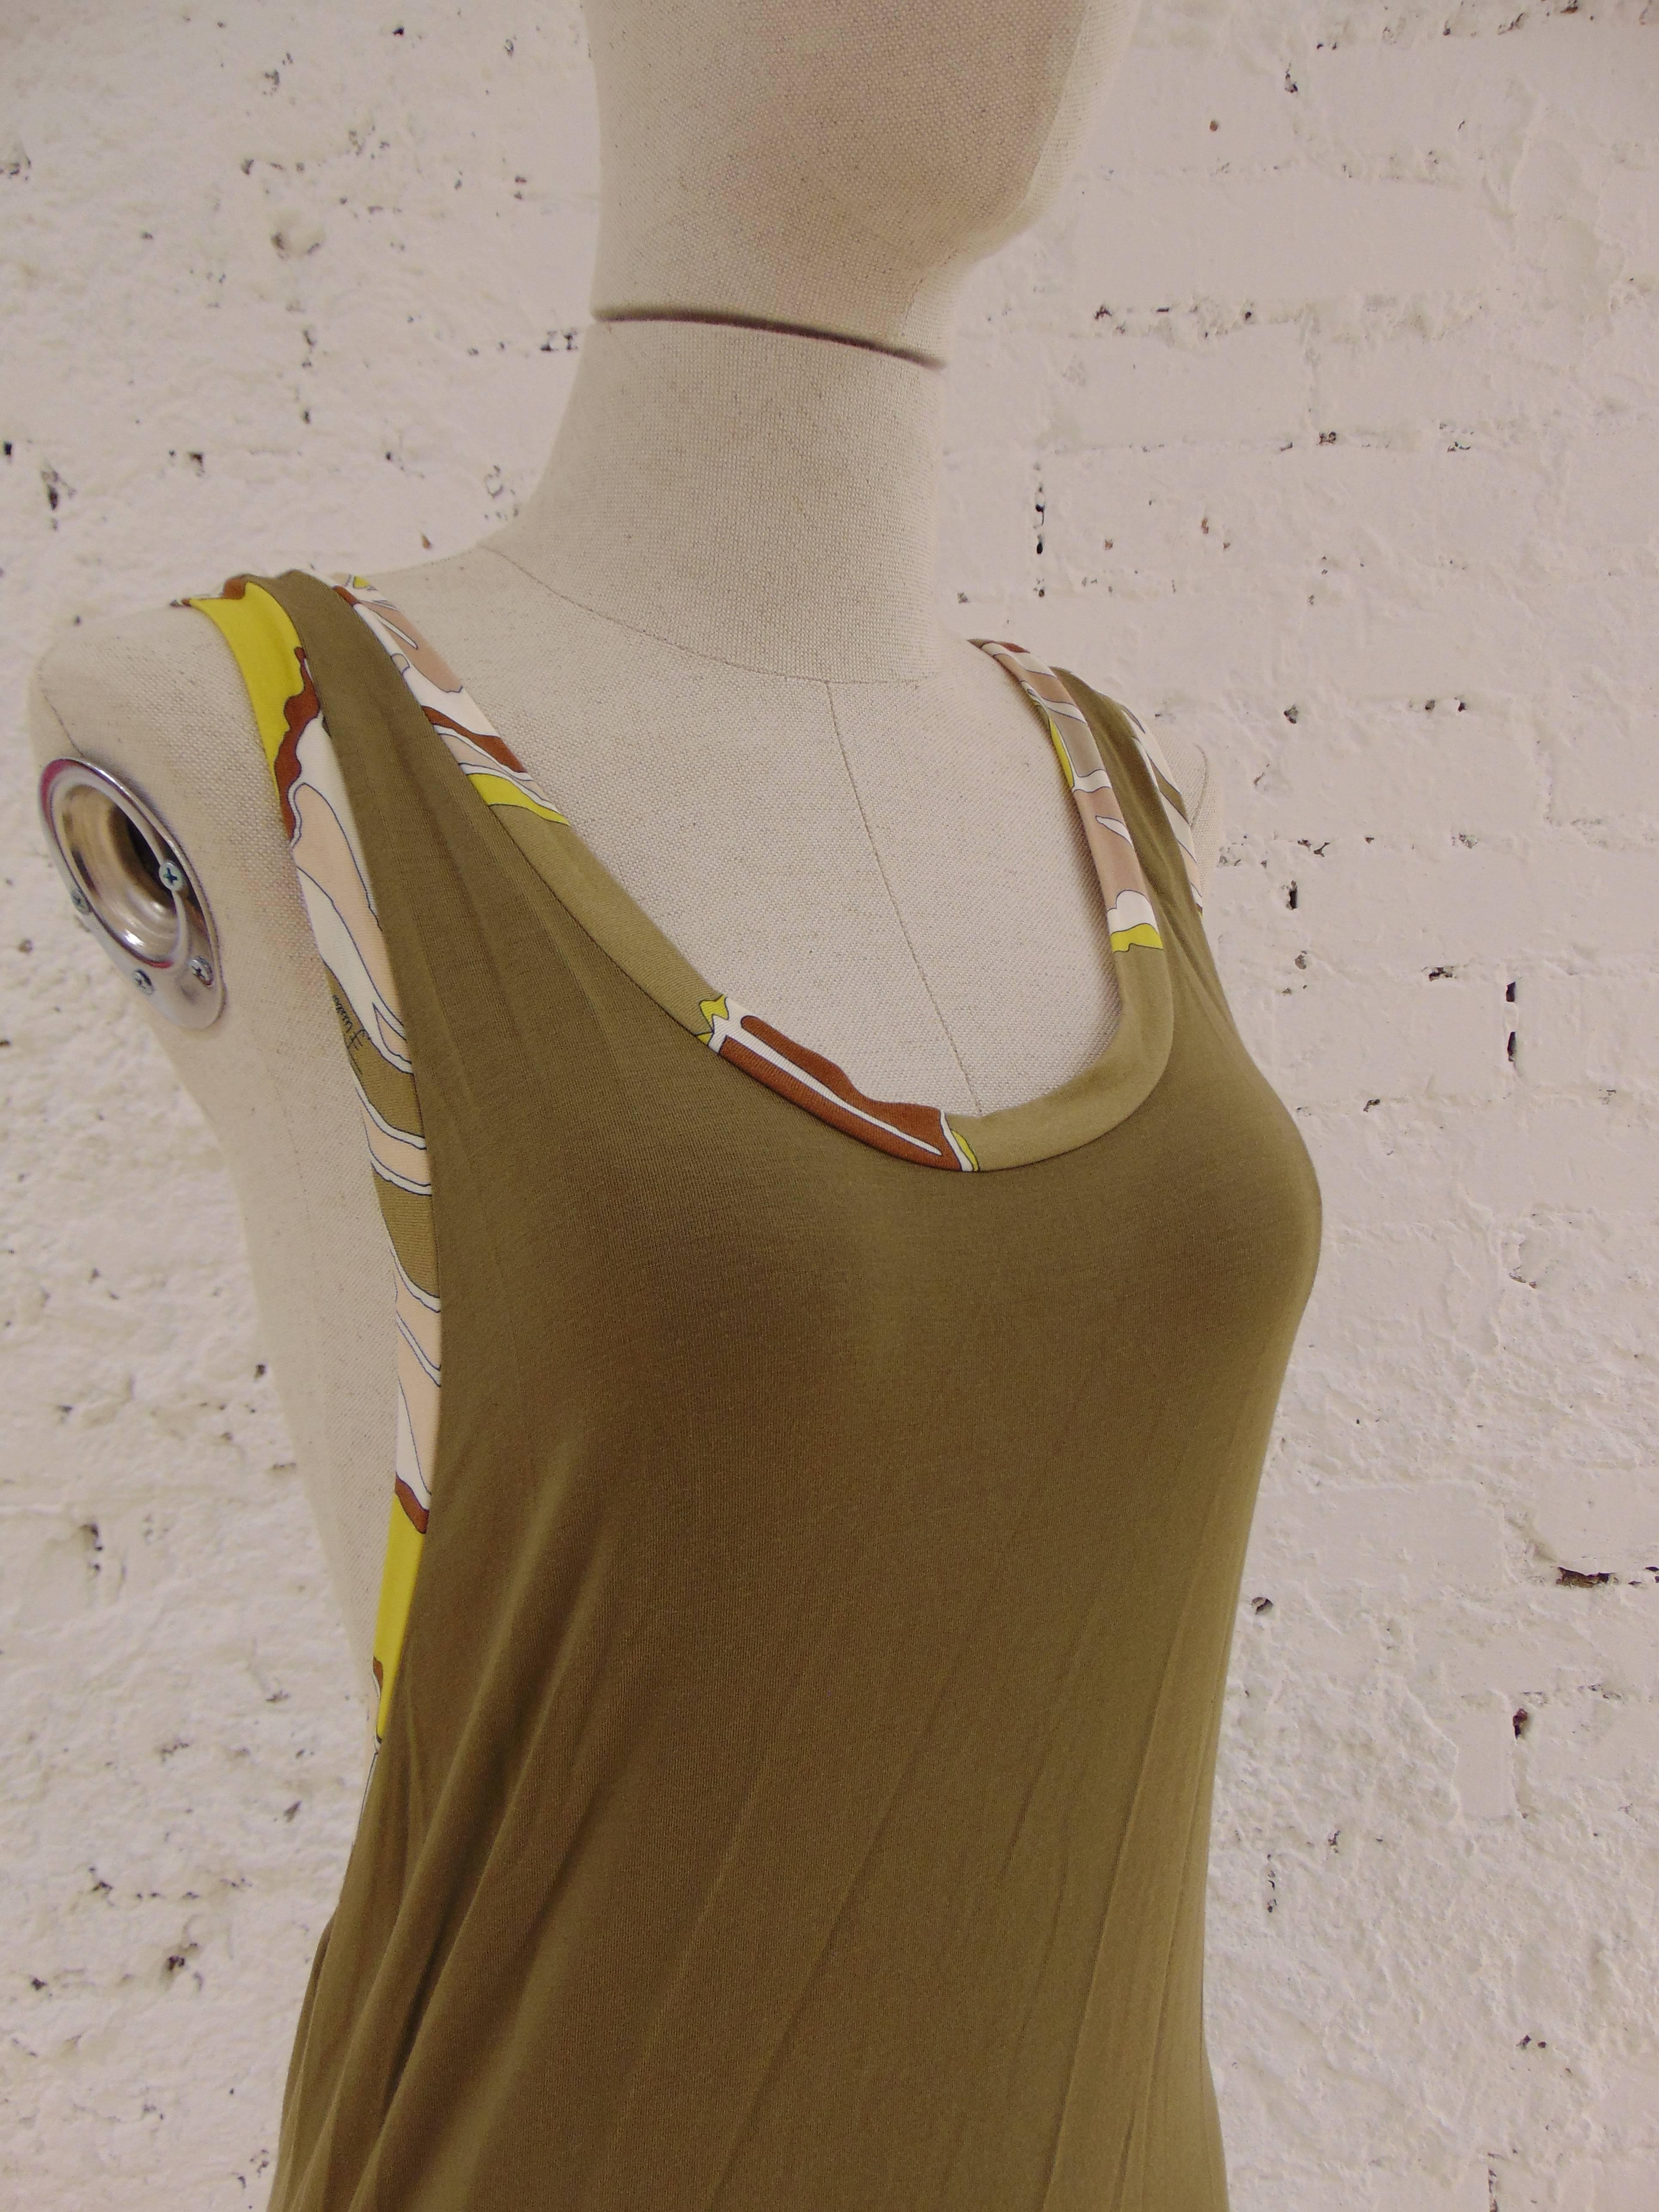 Emilio Pucci green tanktop
totally made in italy in size s
composition: viscose and elastane